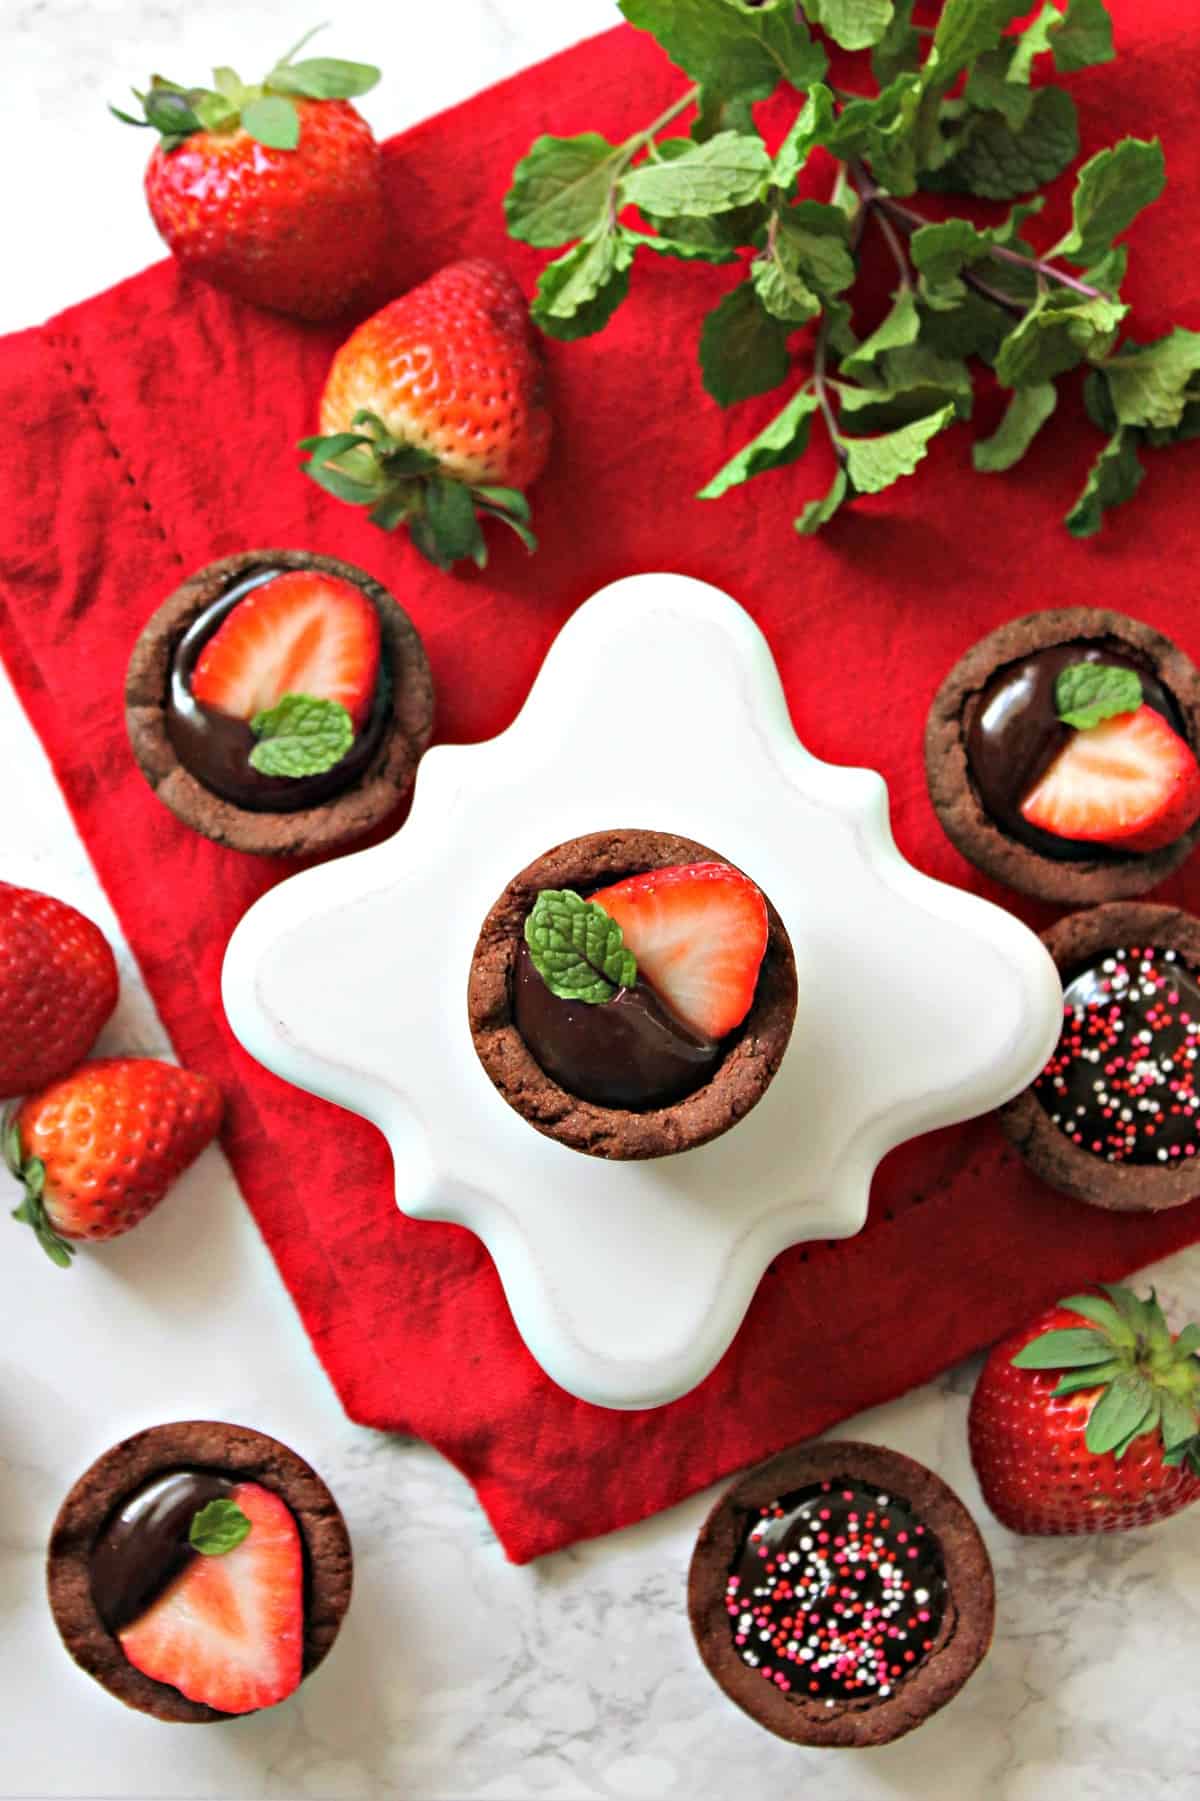 Strawberry & Chocolate Ganache Cookie Cups! Need any easy Valentine's Day treat?  These chocolate cookie "cups" are filled with smooth, creamy chocolate ganache and topped with fresh strawberries for a crowd-pleasing dessert that comes together in no time. 